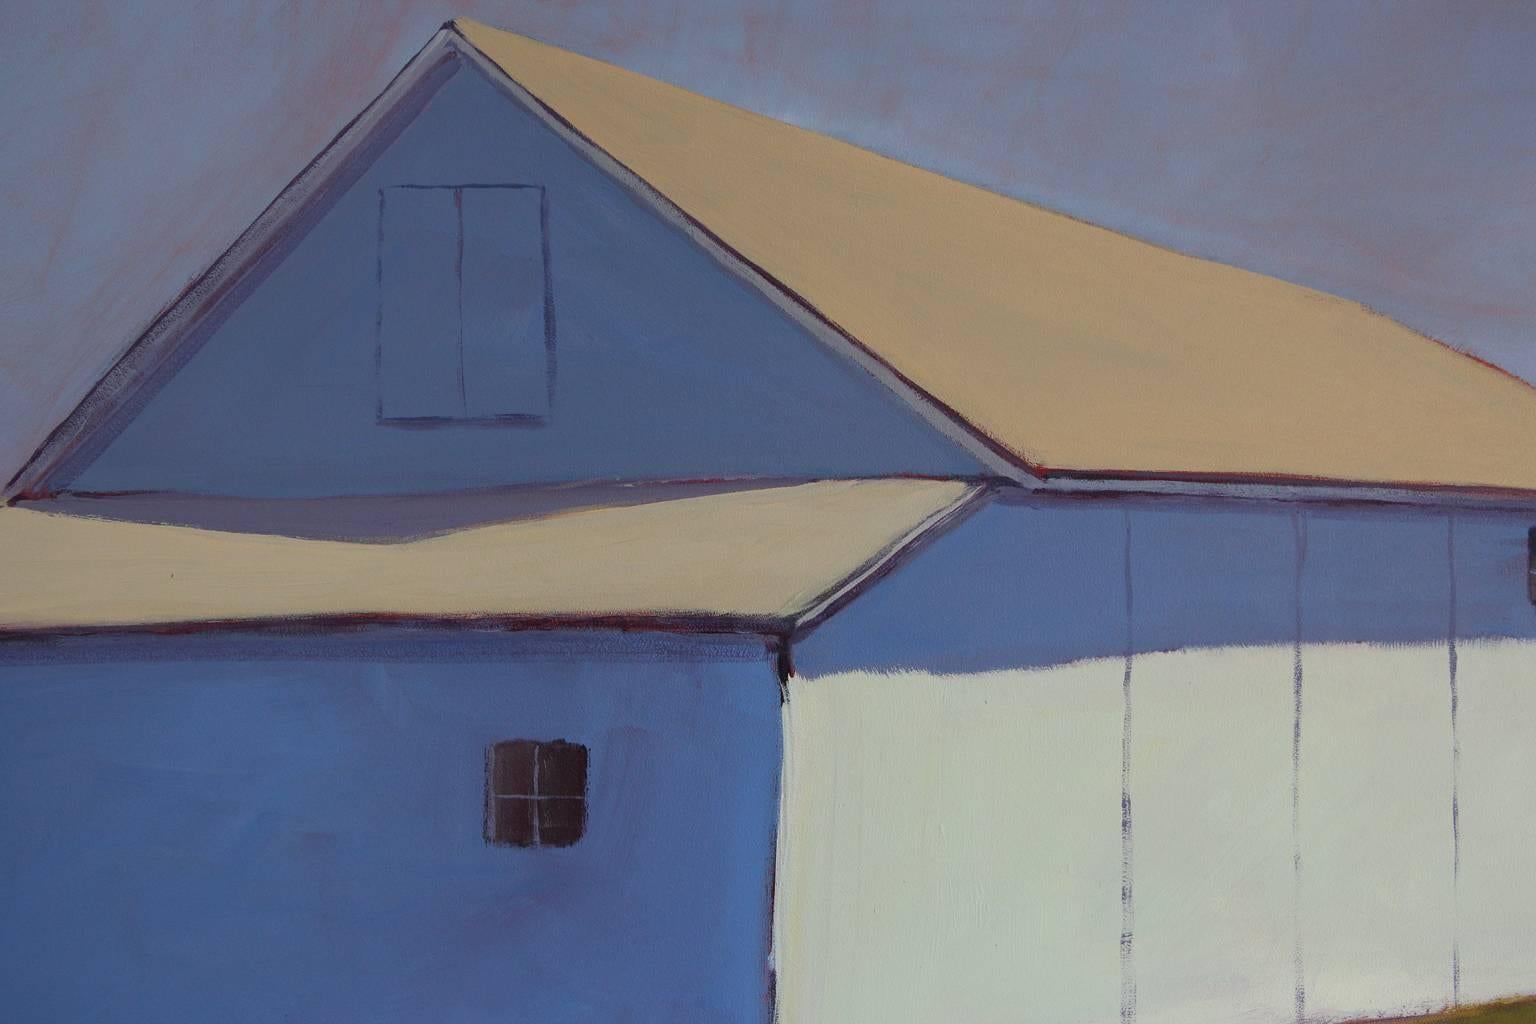 contemporary, interior design, interior decor, transitional, colorful, bold, vibrant, home living, home decor, Barn, shed, rustic, light and shadow, white, beige, moss green, blue

Carol C. Young is landscape painter working in acrylics and oils.